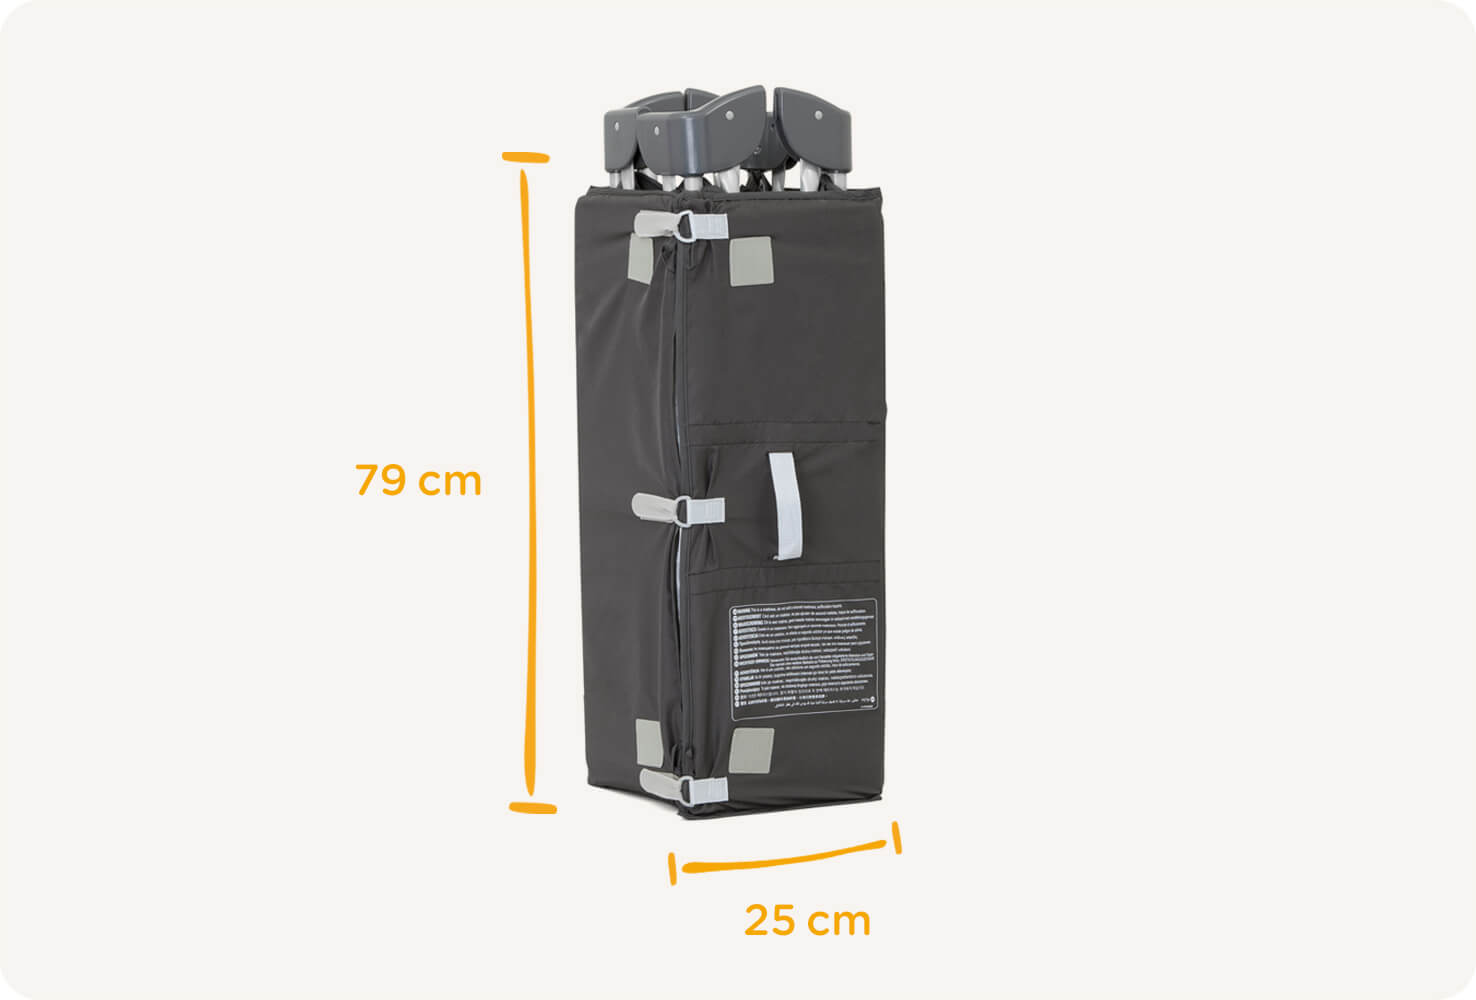 The Joie travel cot commuter change in grey packed up in travel case with measurement of 79cm height and 25cm width.